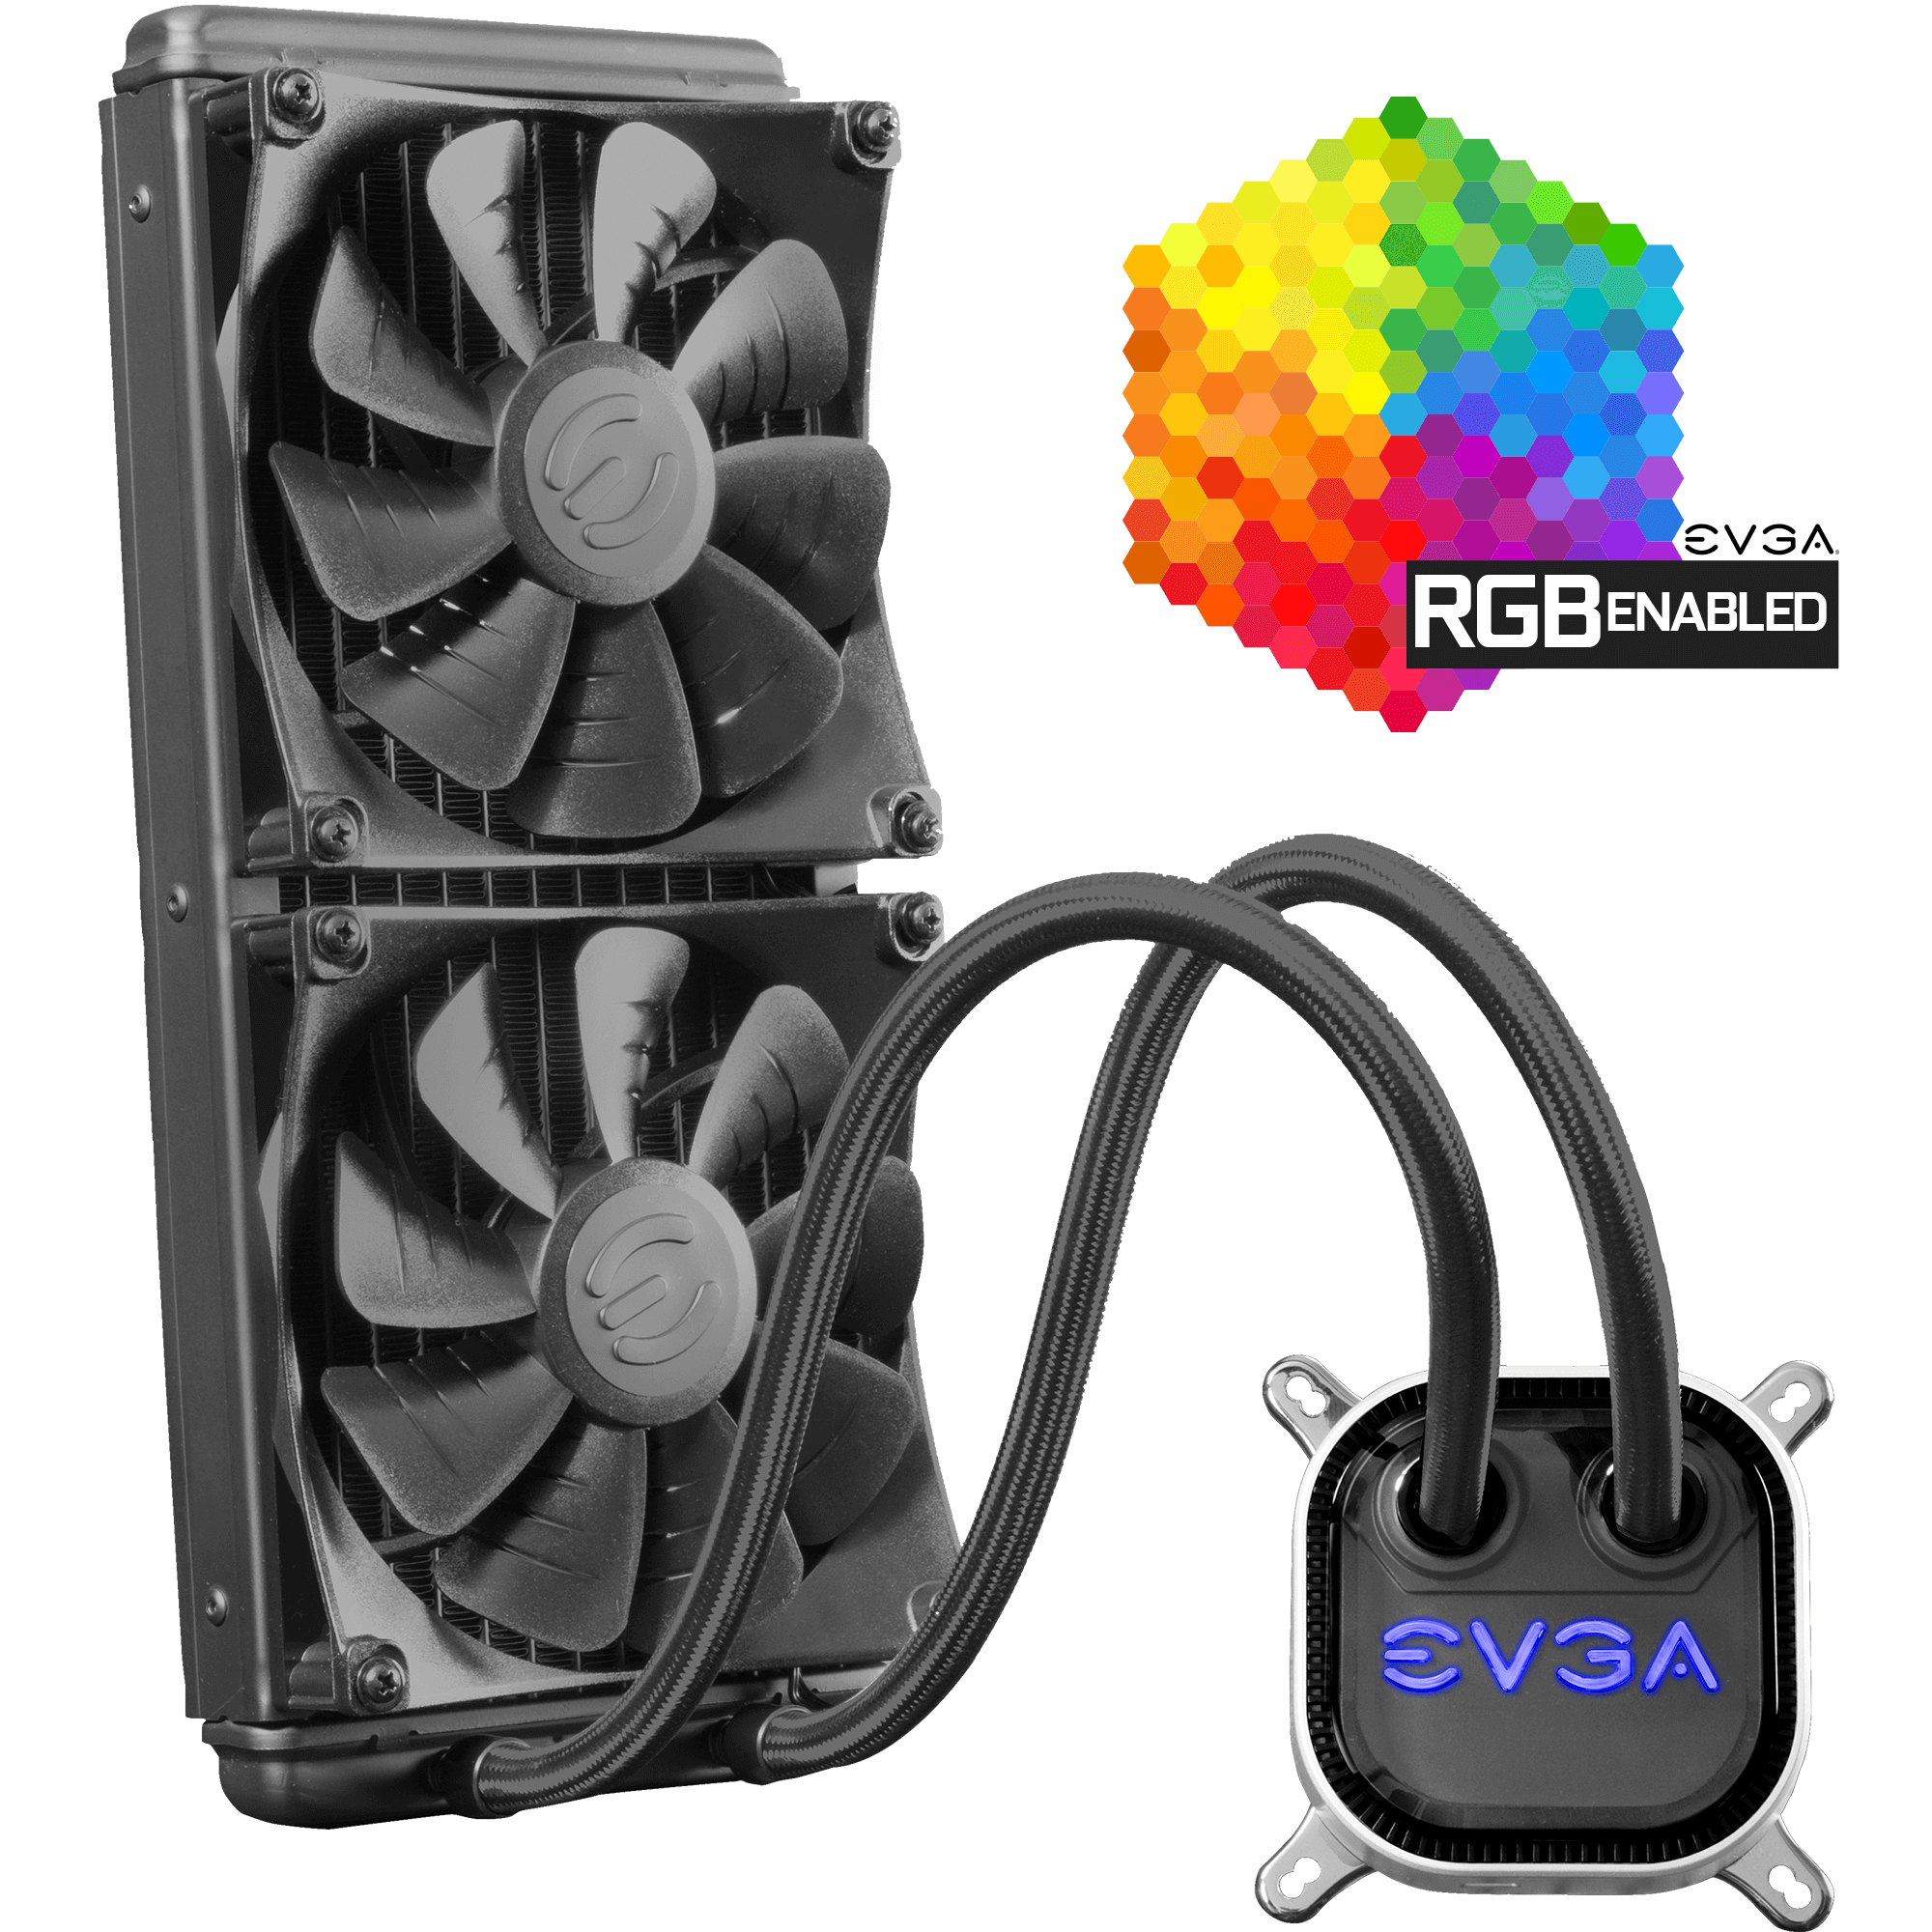 constantly Outcome Frosty EVGA - EU - Products - EVGA CLC 280mm All-In-One RGB LED CPU Liquid Cooler,  2x FX13 140mm PWM Fans, Intel, AMD, 5 YR Warranty, 400-HY-CL28-V1 -  400-HY-CL28-V1